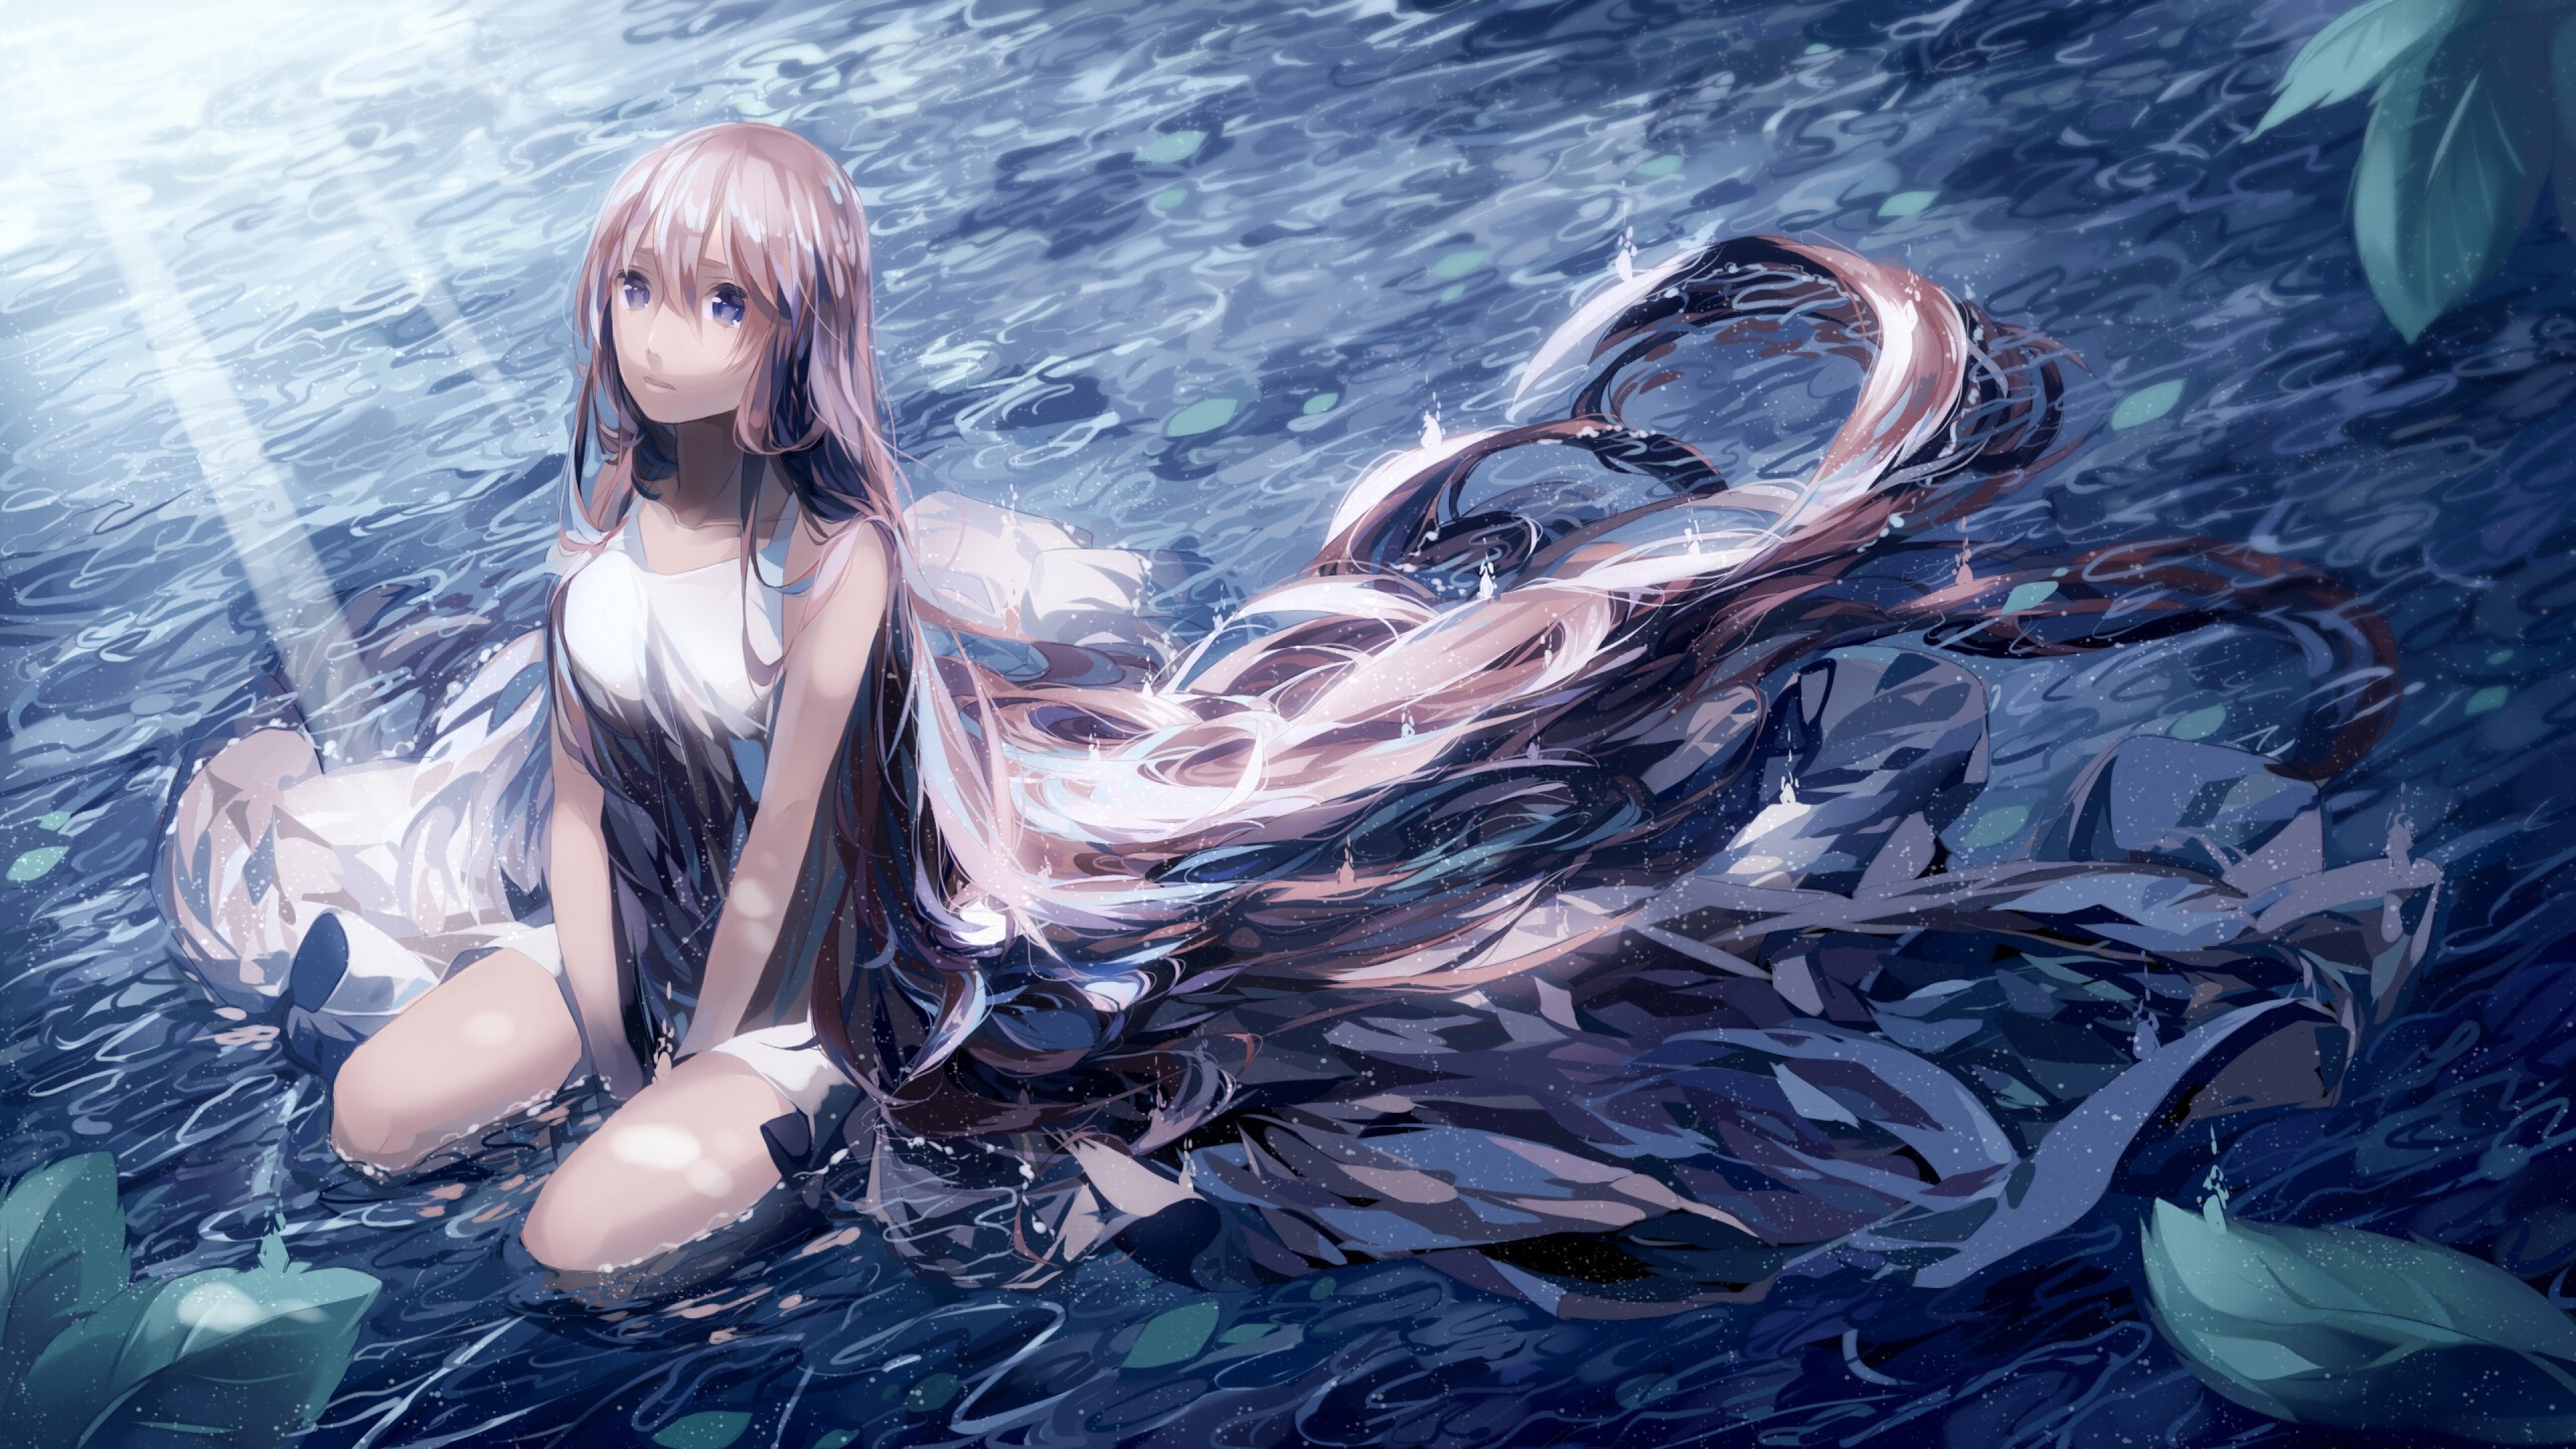 Anime Girl And Water pc wallpaper